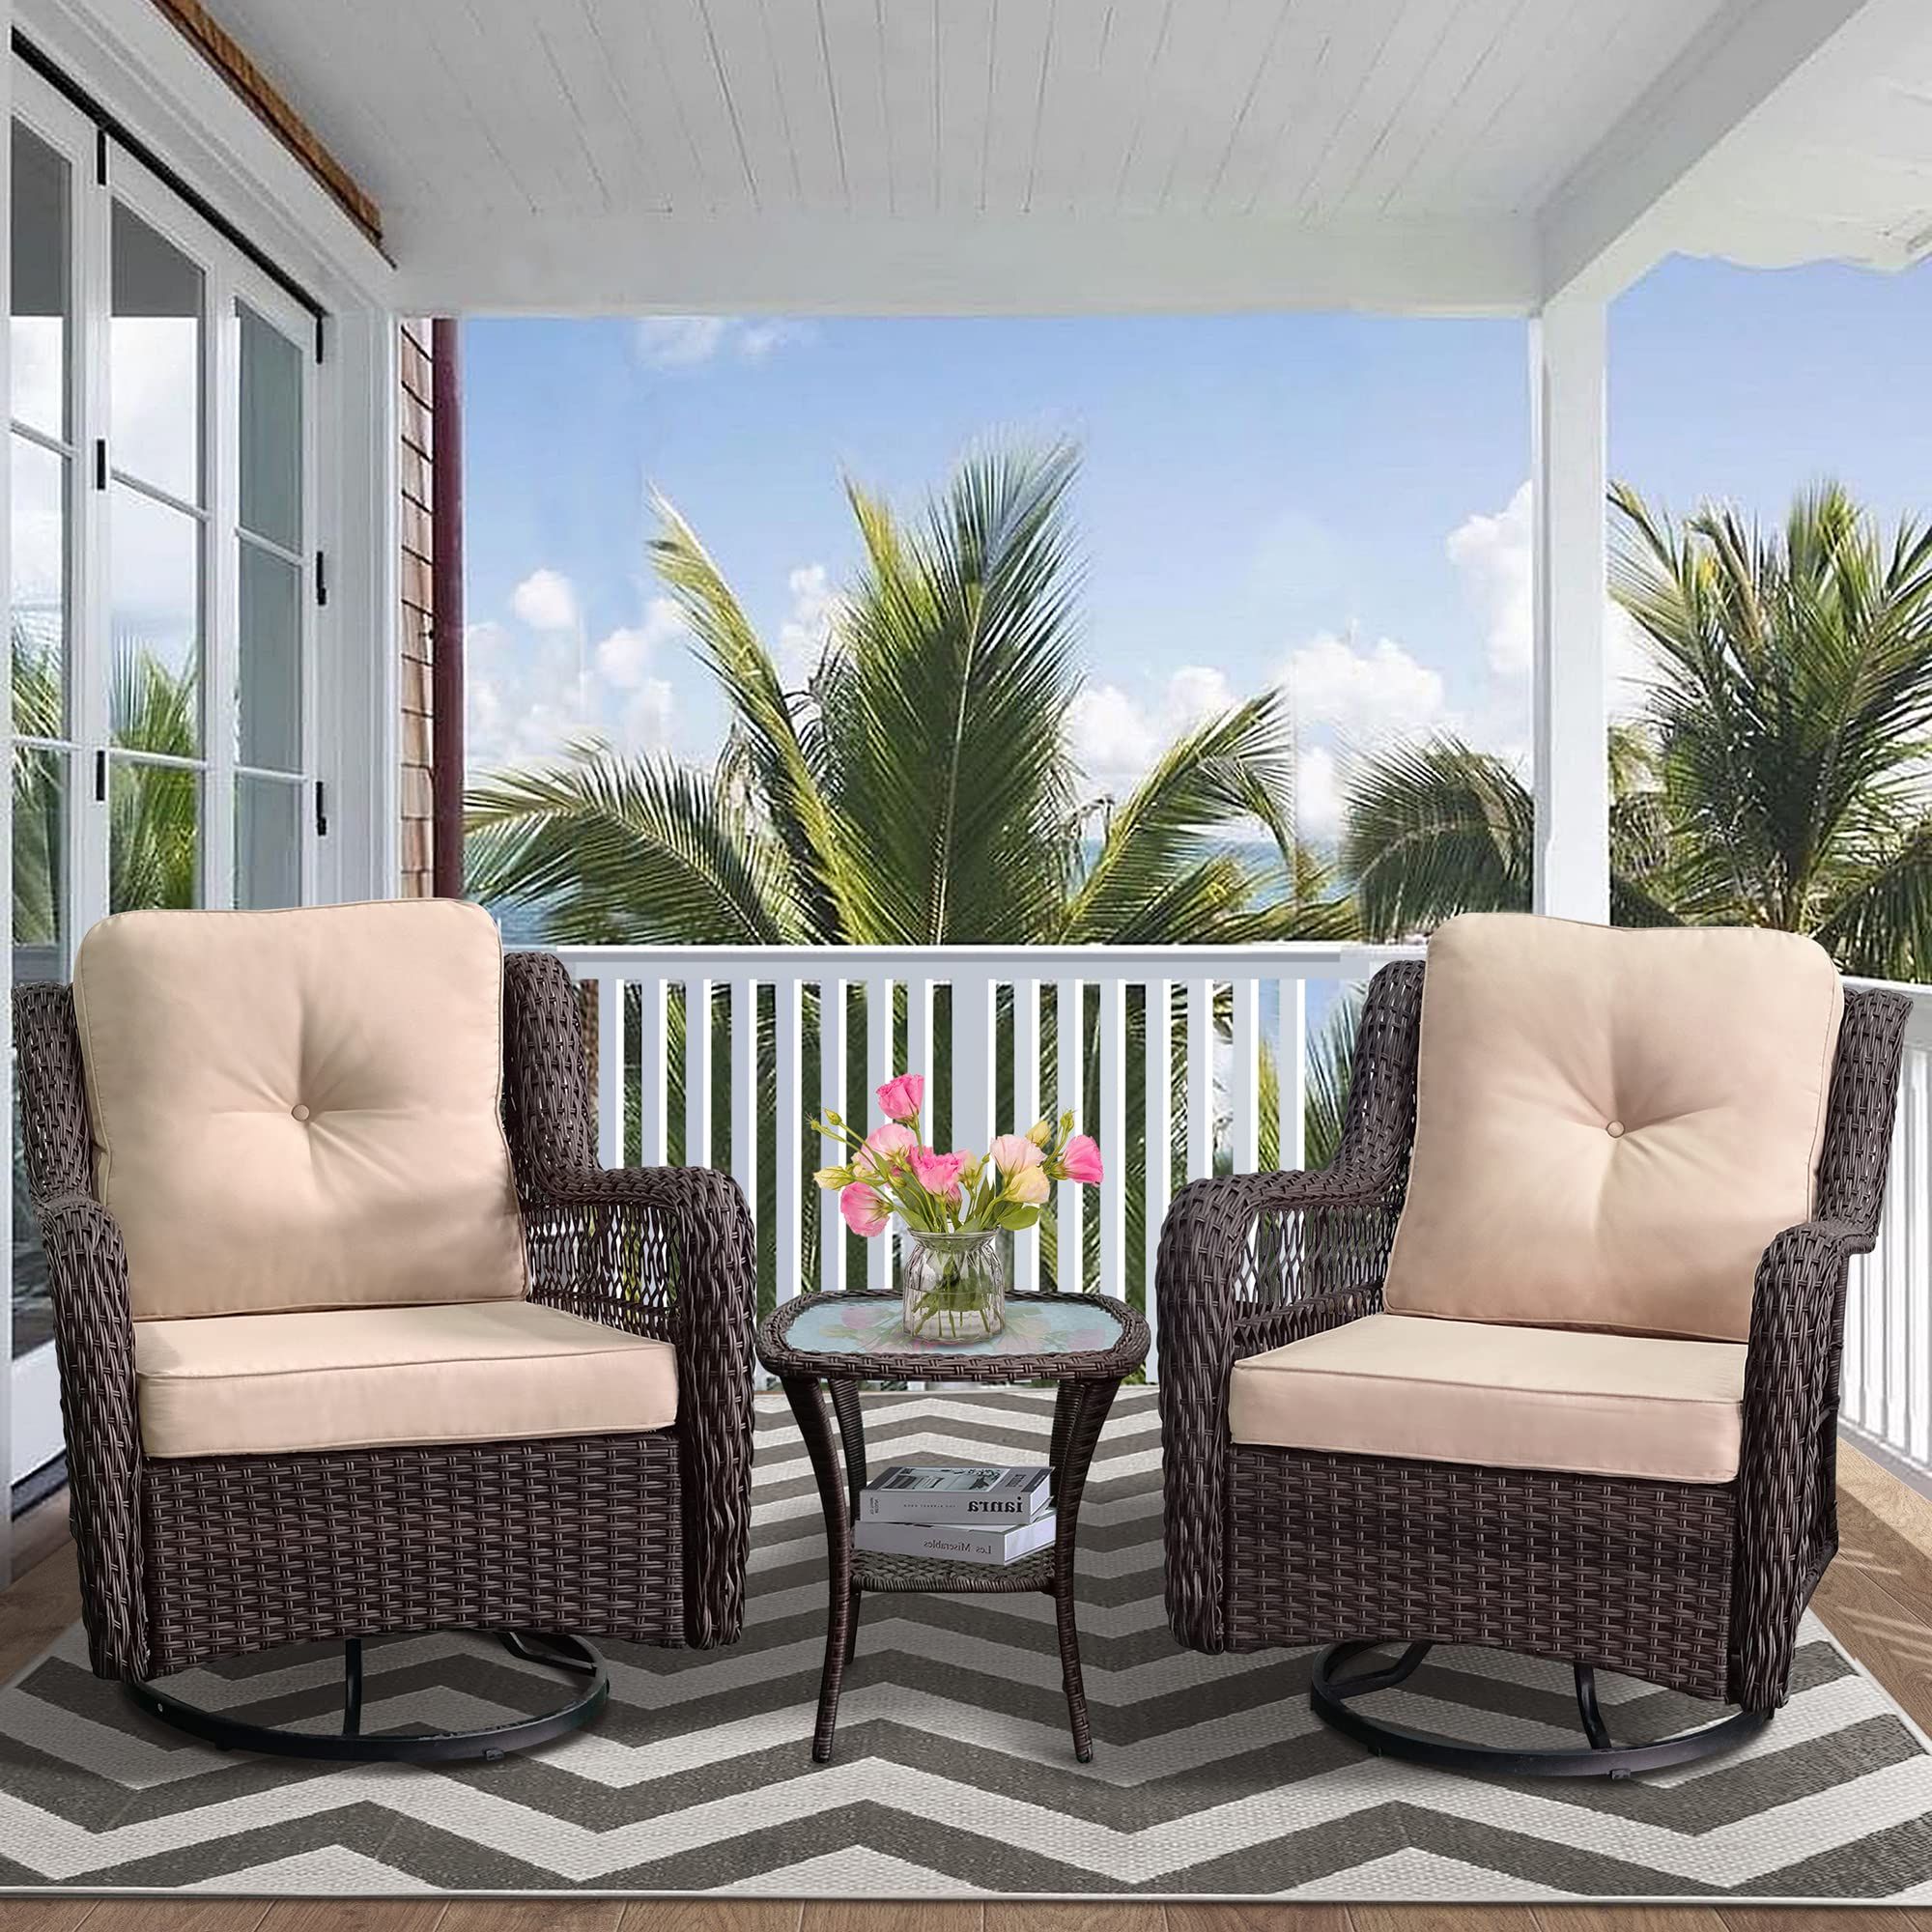 Most Up To Date 2 Piece Swivel Gliders With Patio Cover Regarding Amazon: 3 Pieces Outdoor Swivel Glider Rocker Set, Wicker Patio Bistro  Set With Rocking Chair, Cushions And Side Coffee Table (khaki) : Patio,  Lawn & Garden (View 9 of 15)